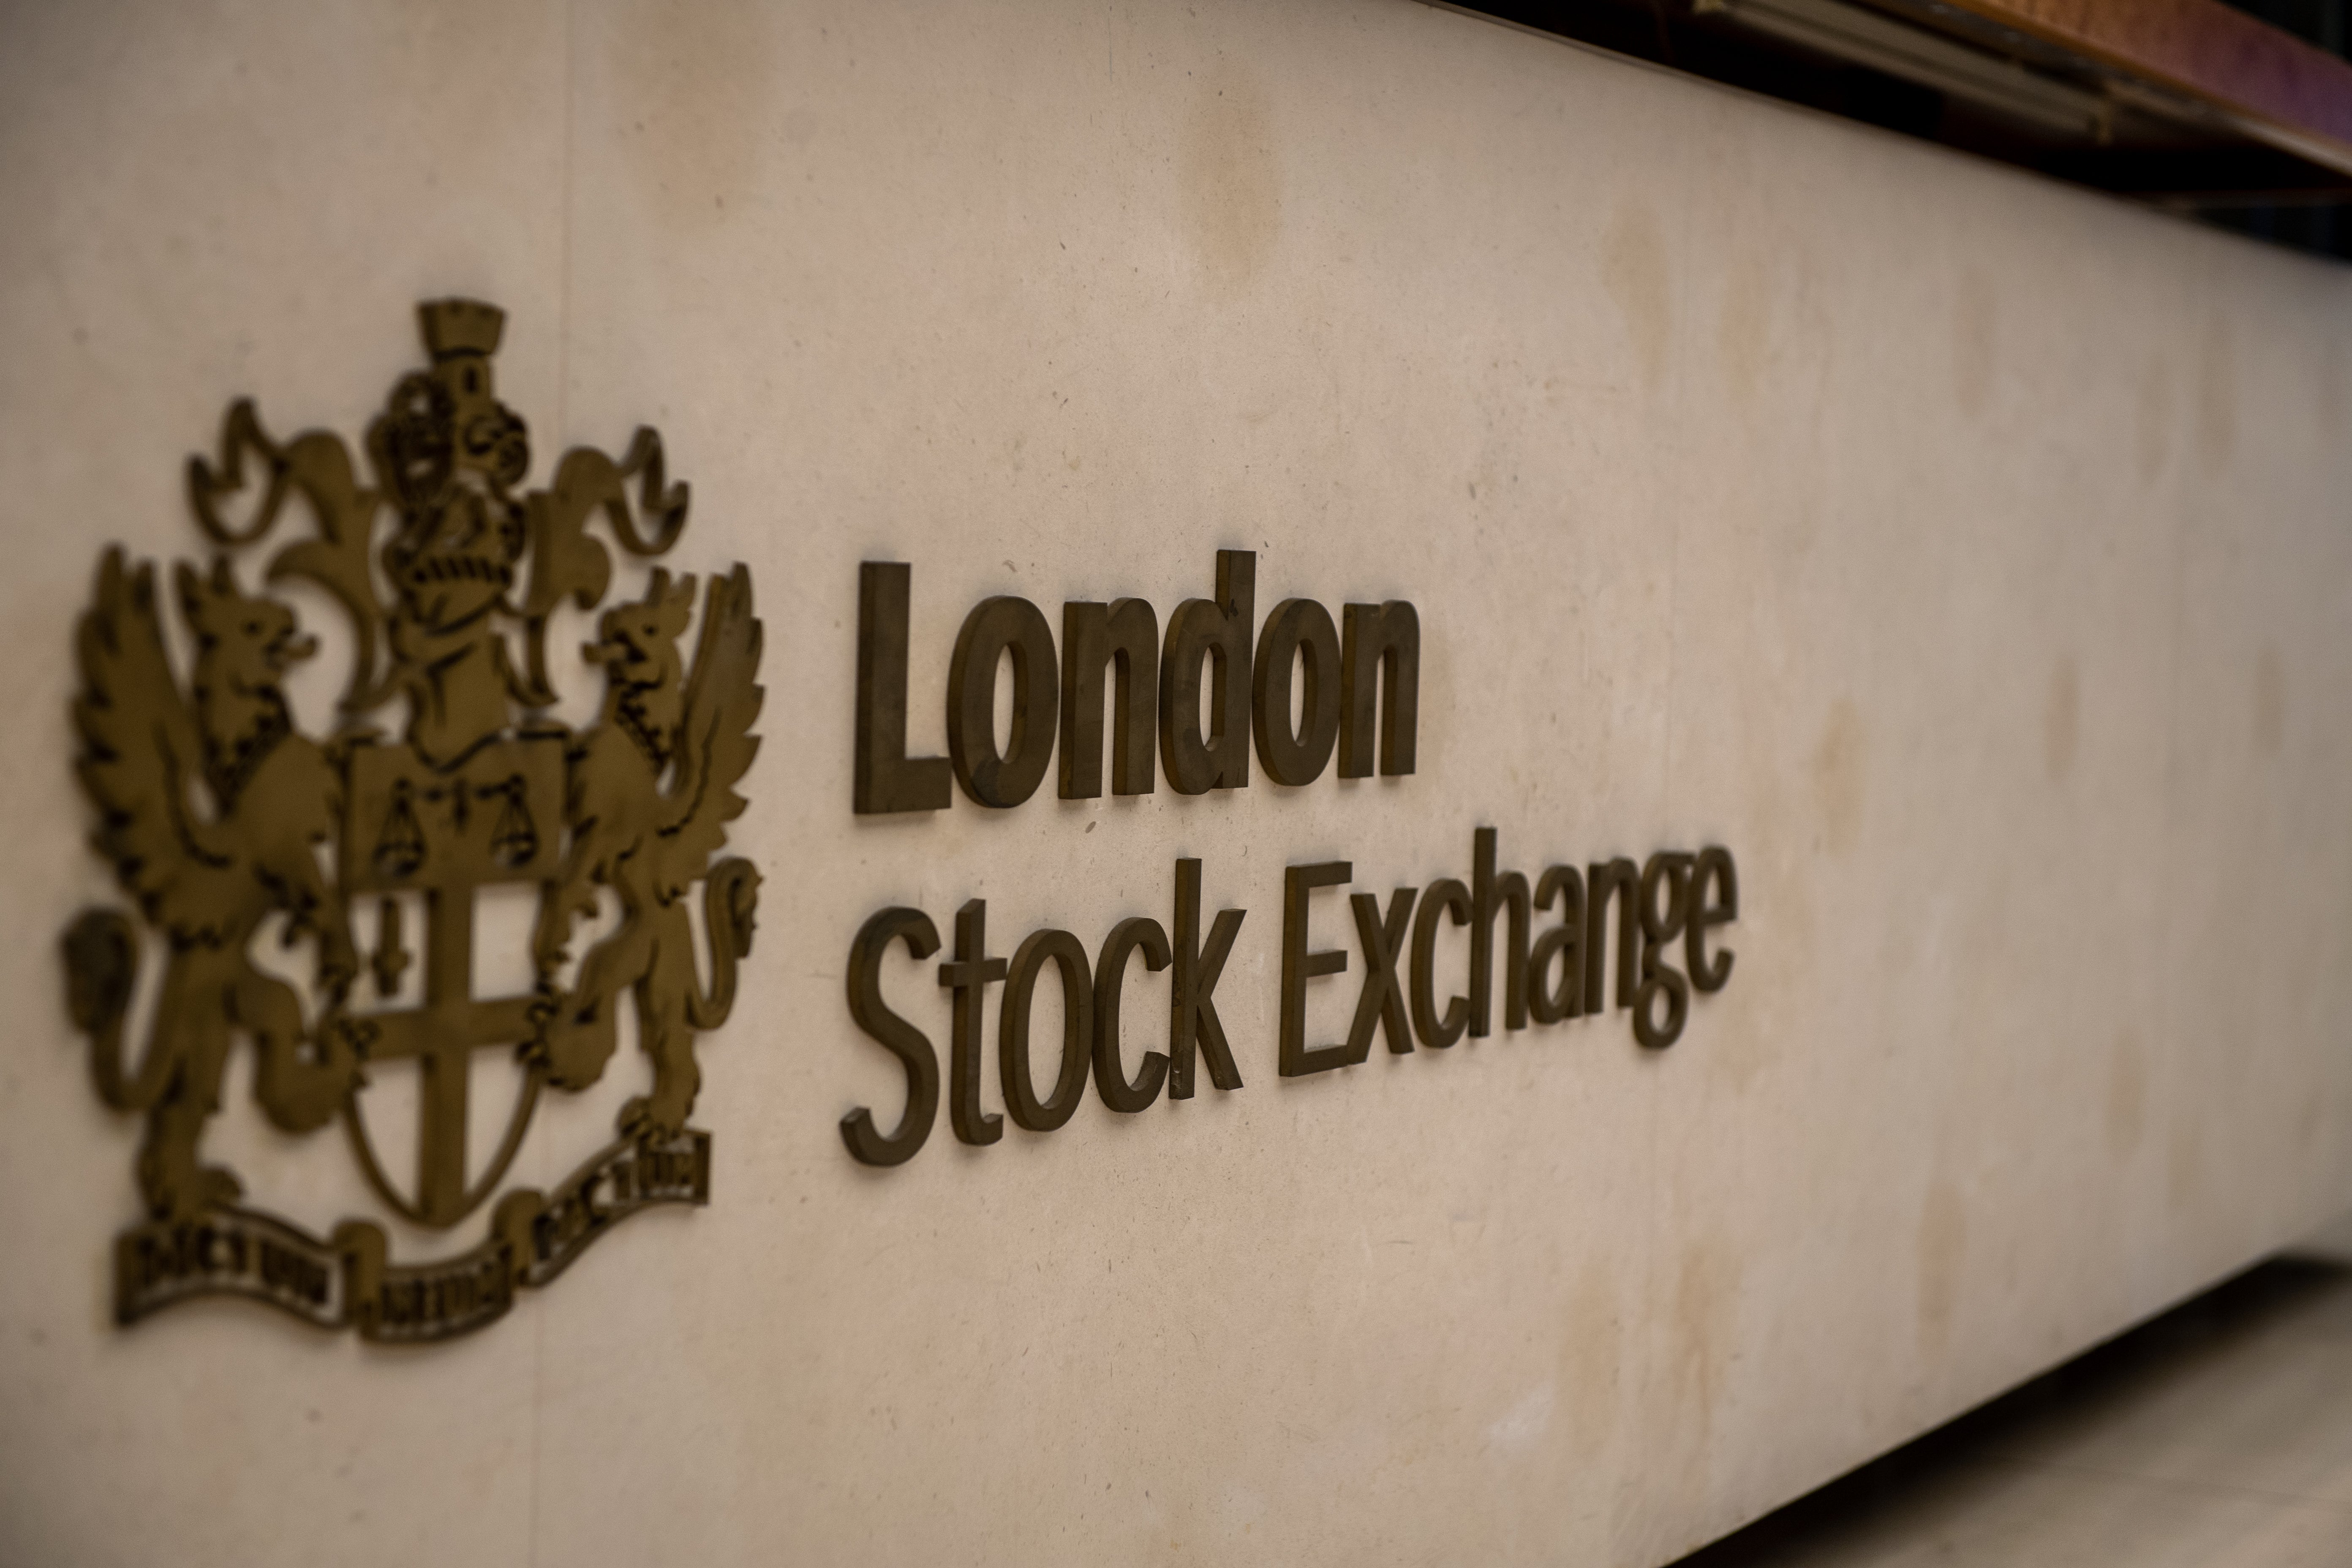 FTSE 100 closes lower after a strong week but US stocks continue to rise